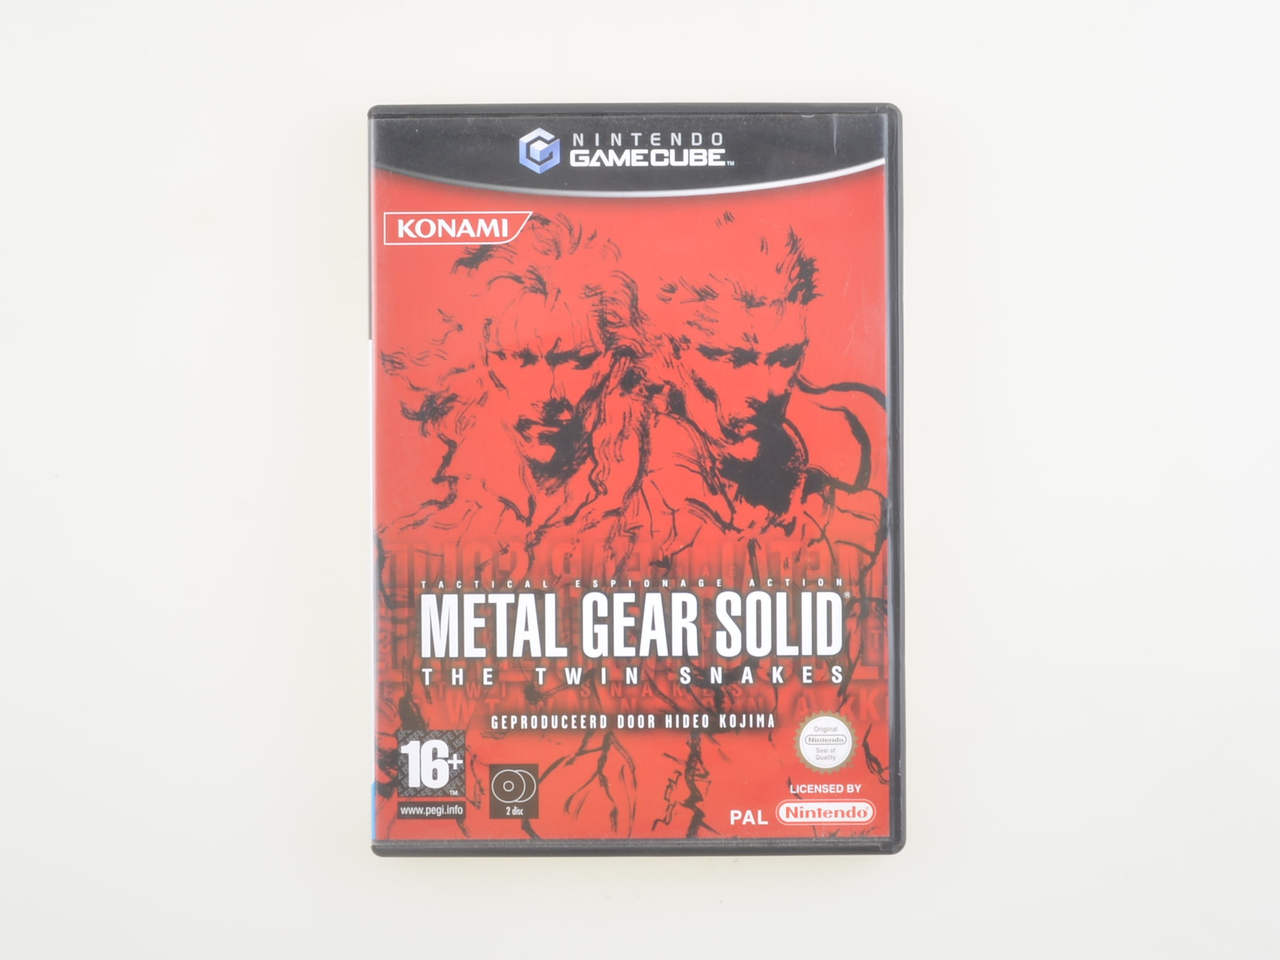 Metal Gear Solid: The Twin Snakes | Gamecube Games | RetroNintendoKopen.nl